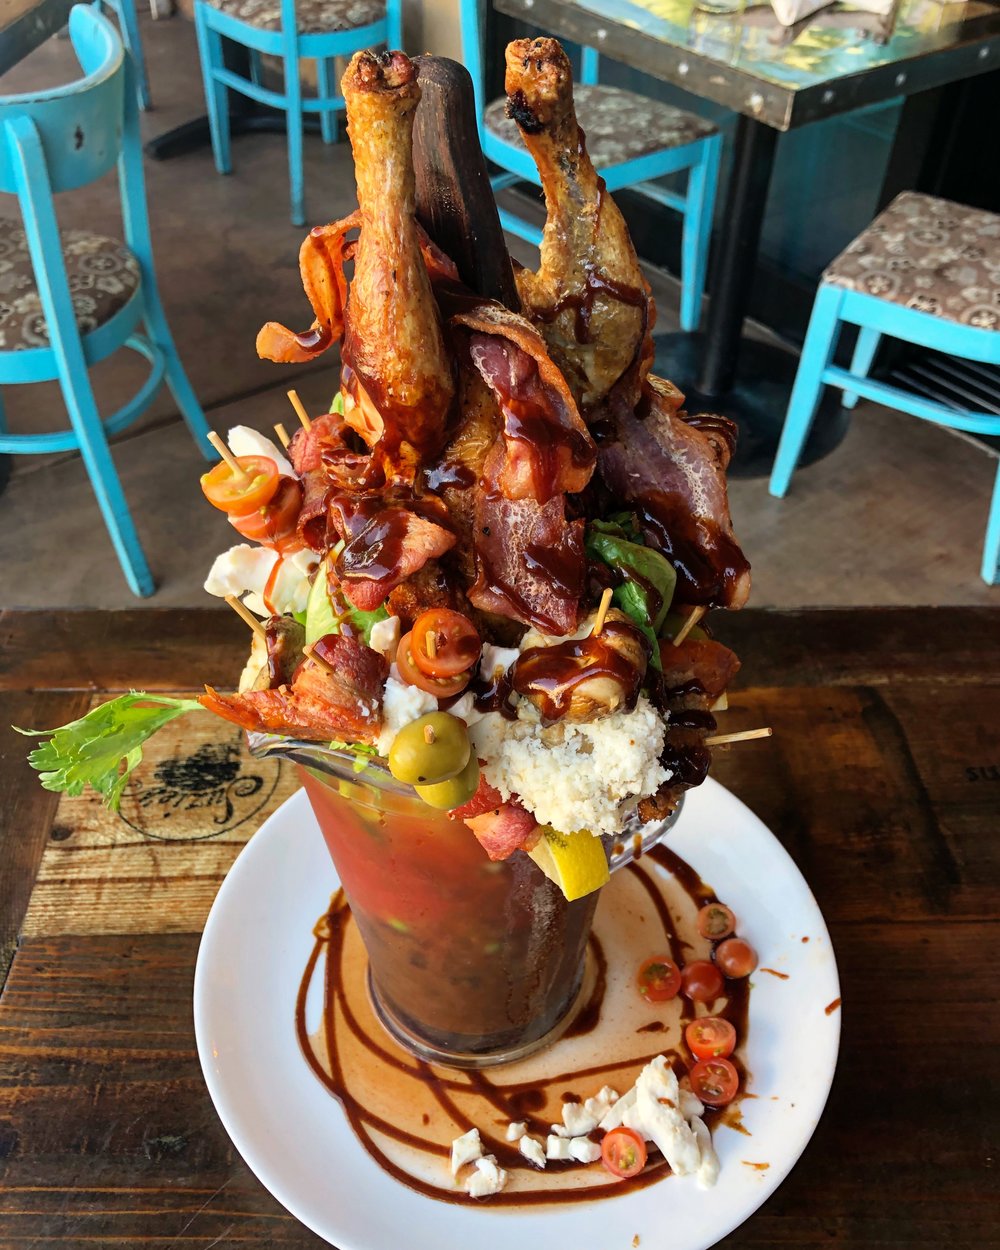 This Bloody Mary has a WHOLE CHICKEN in IT…